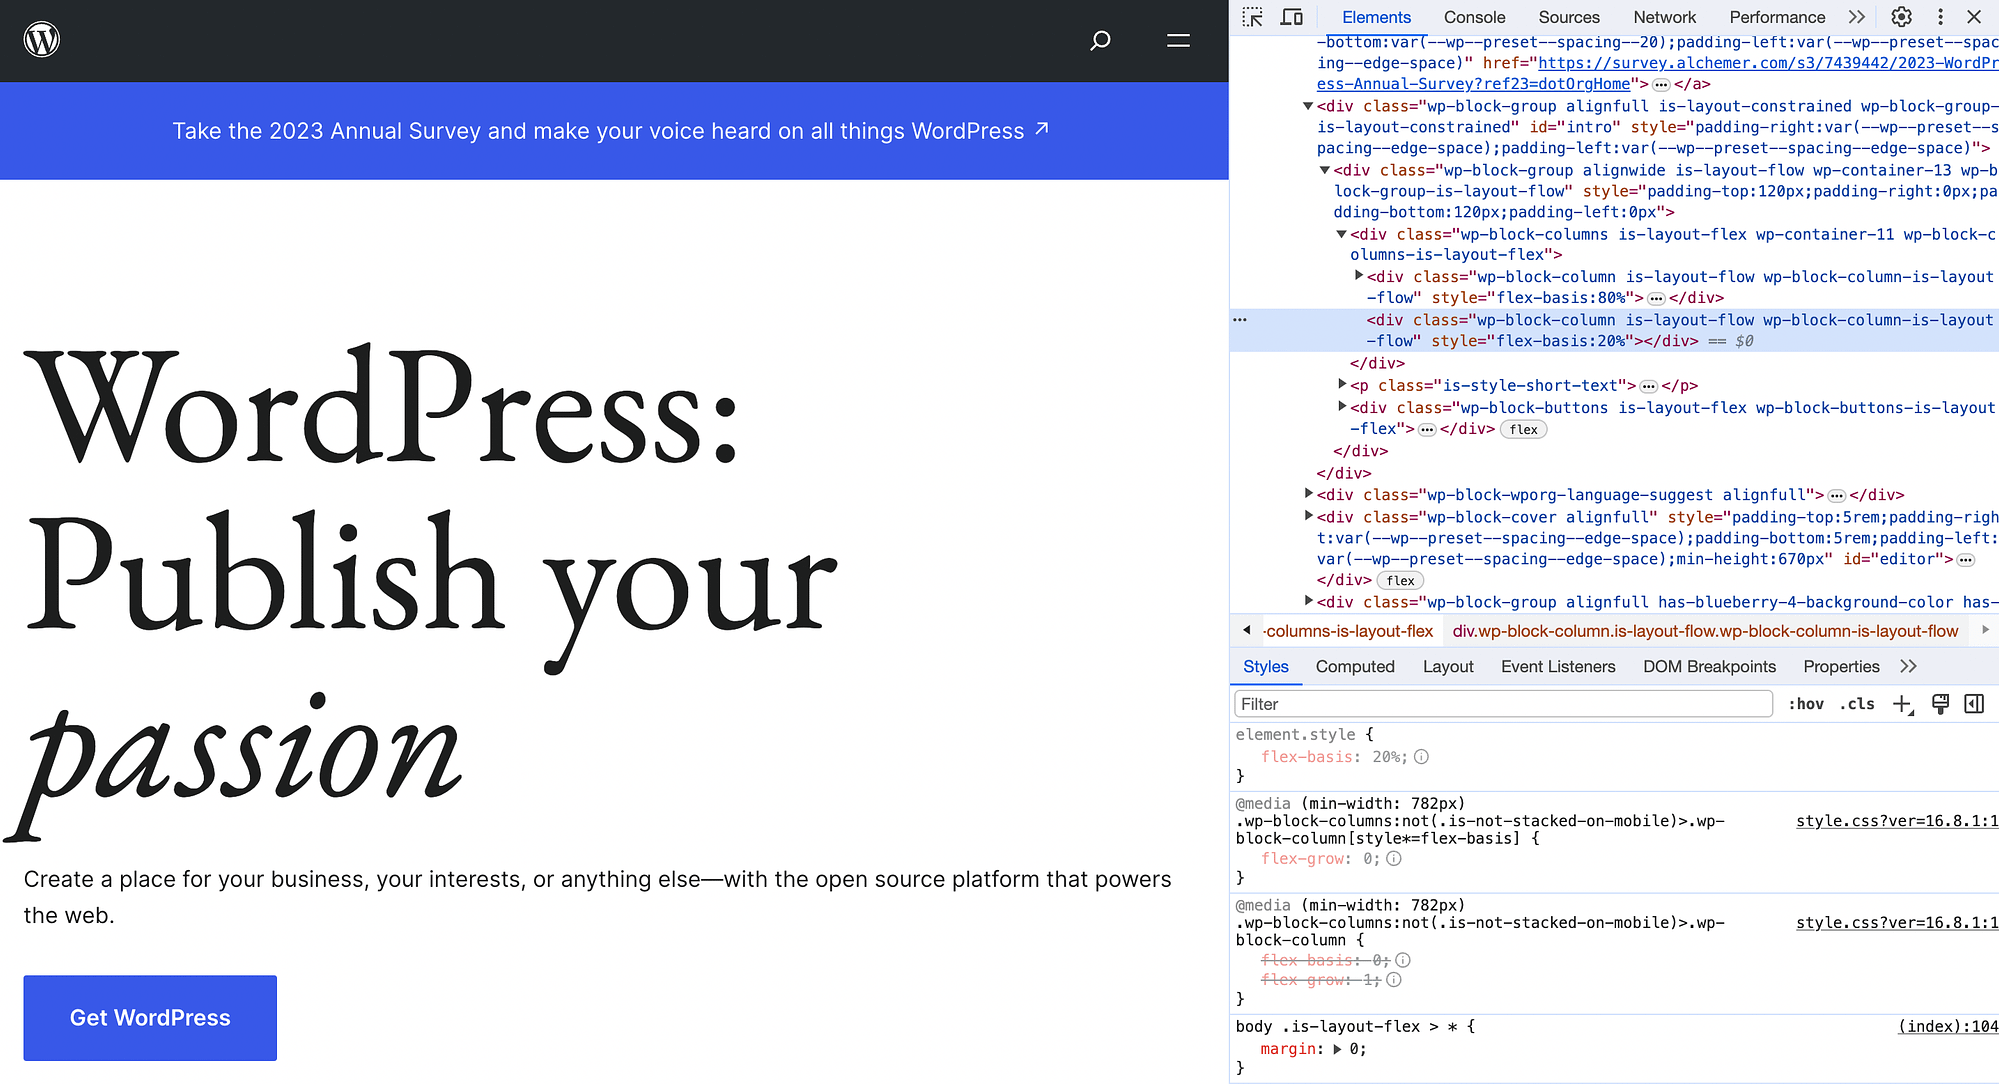 Viewing a website's code using the Inspect tool.